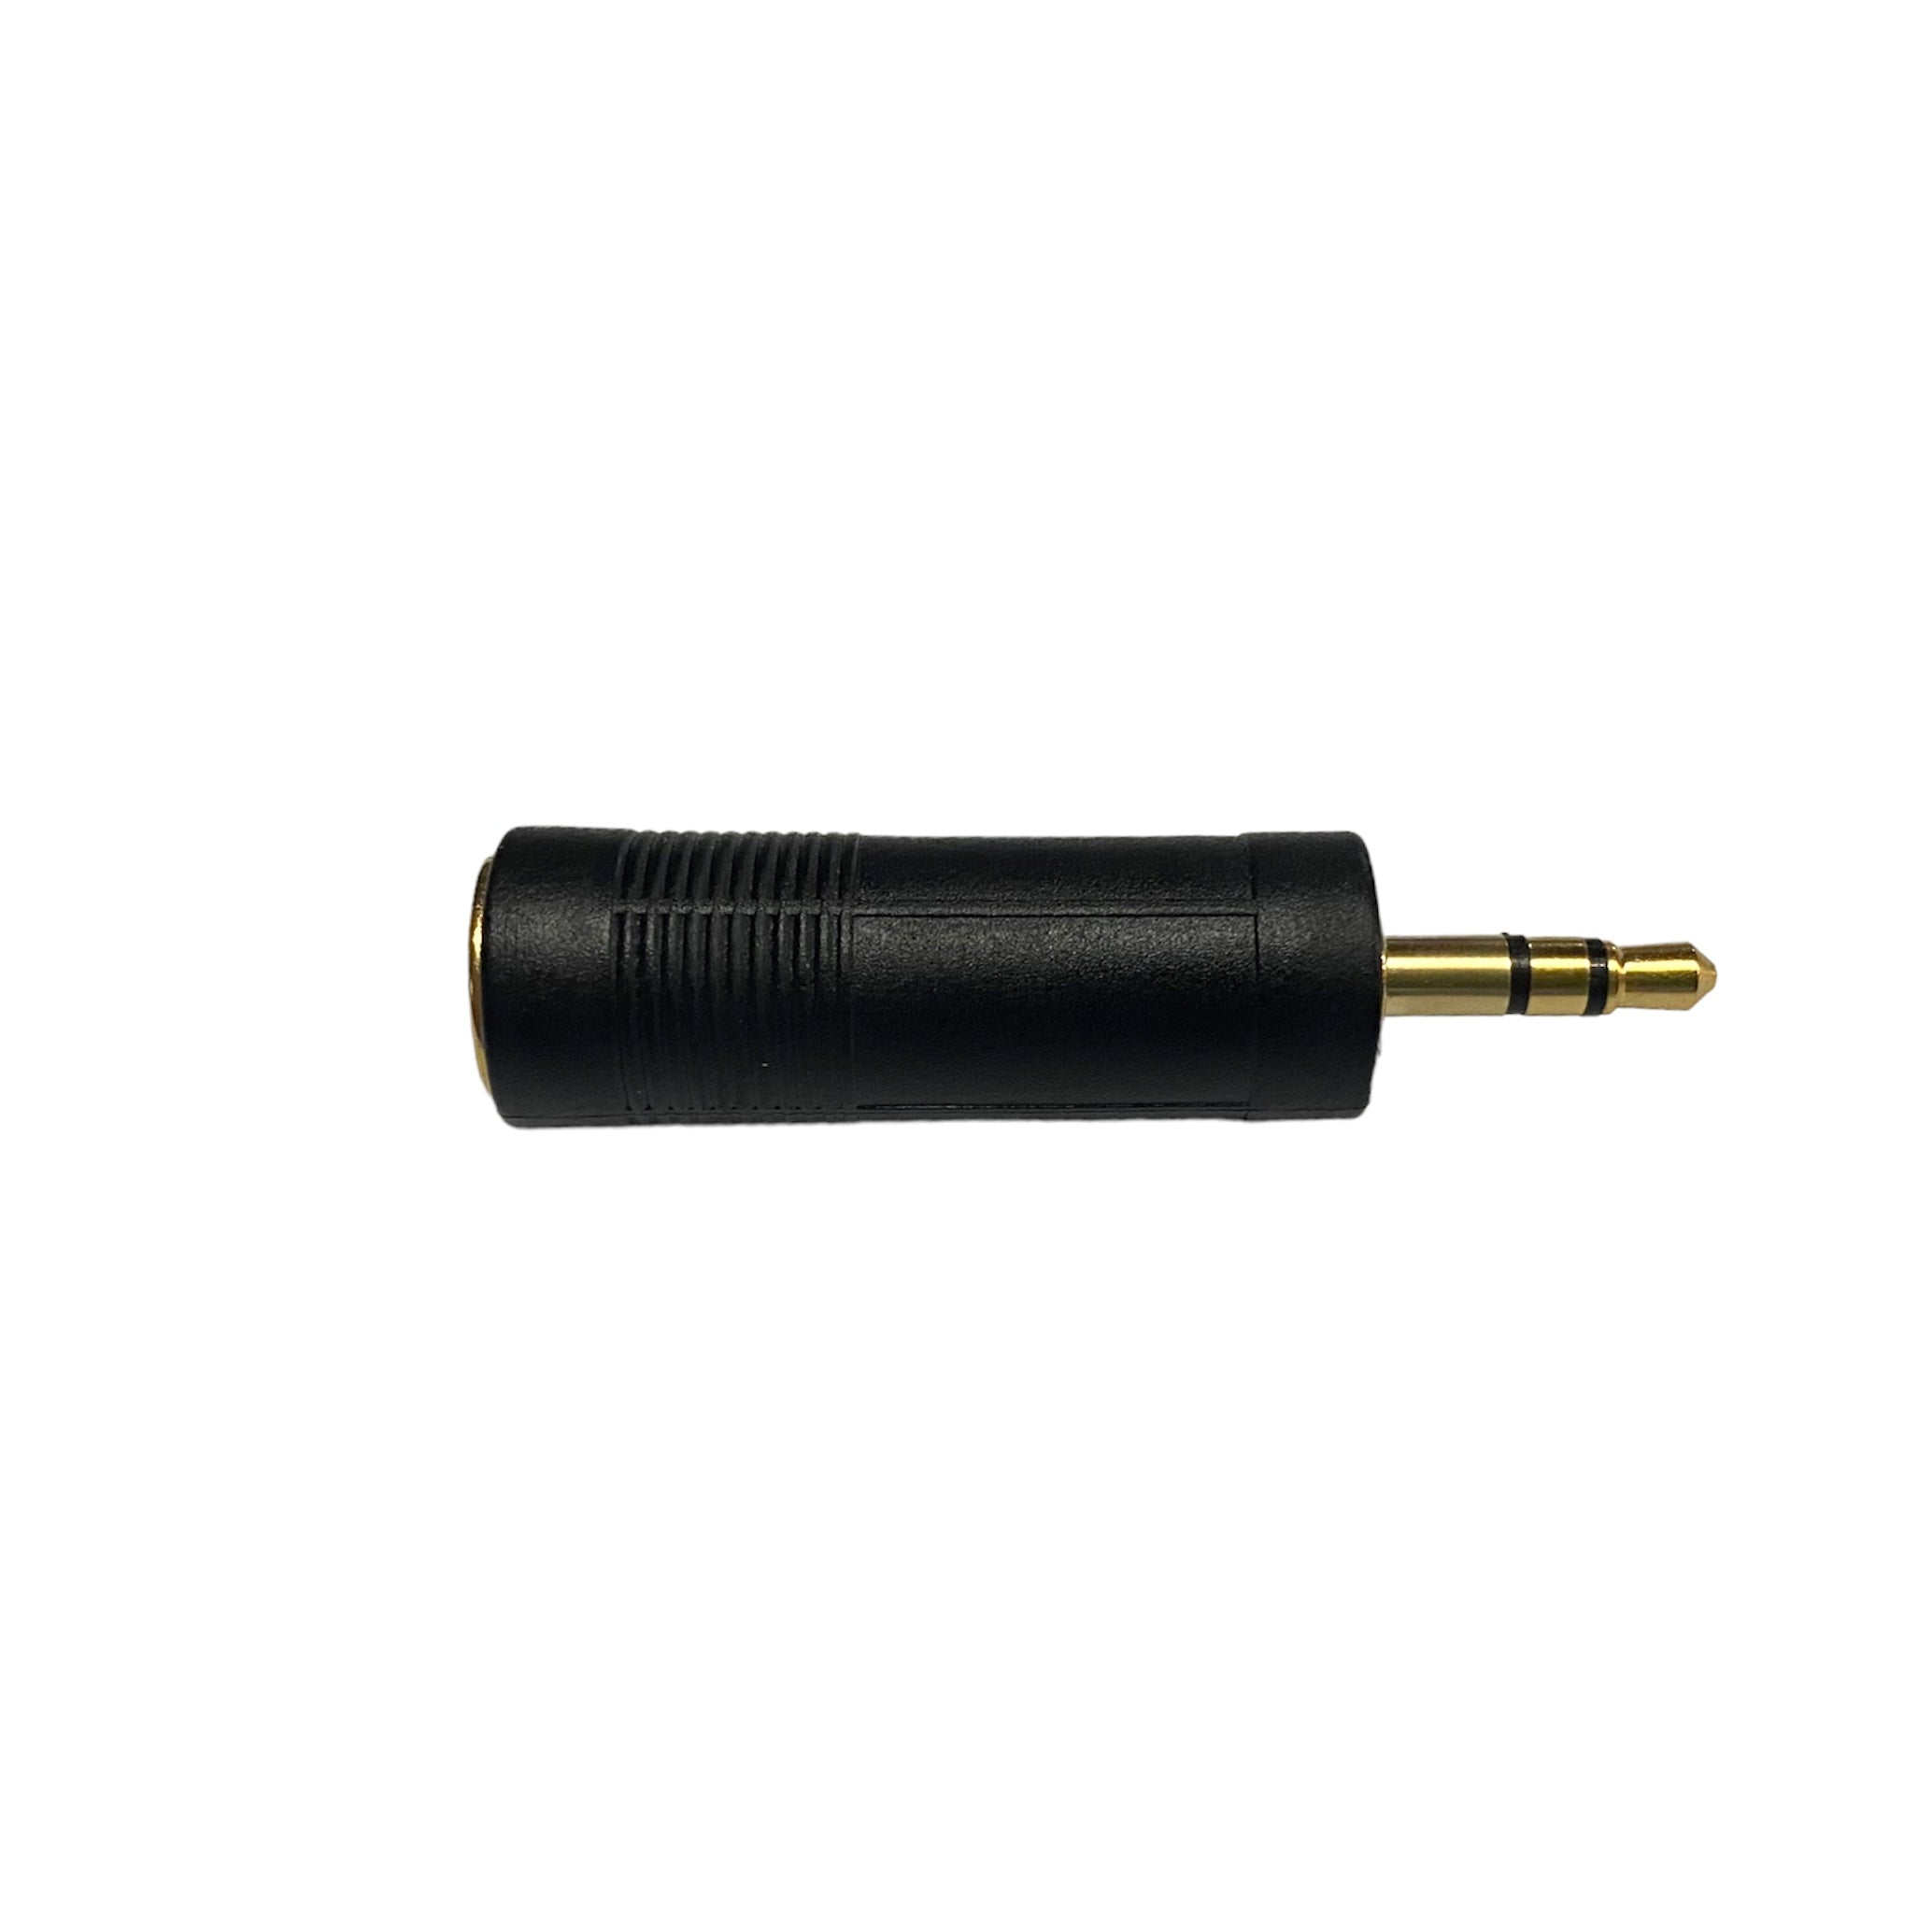 Adaptor - Stereo 6.3mm Female to 3.5mm Male